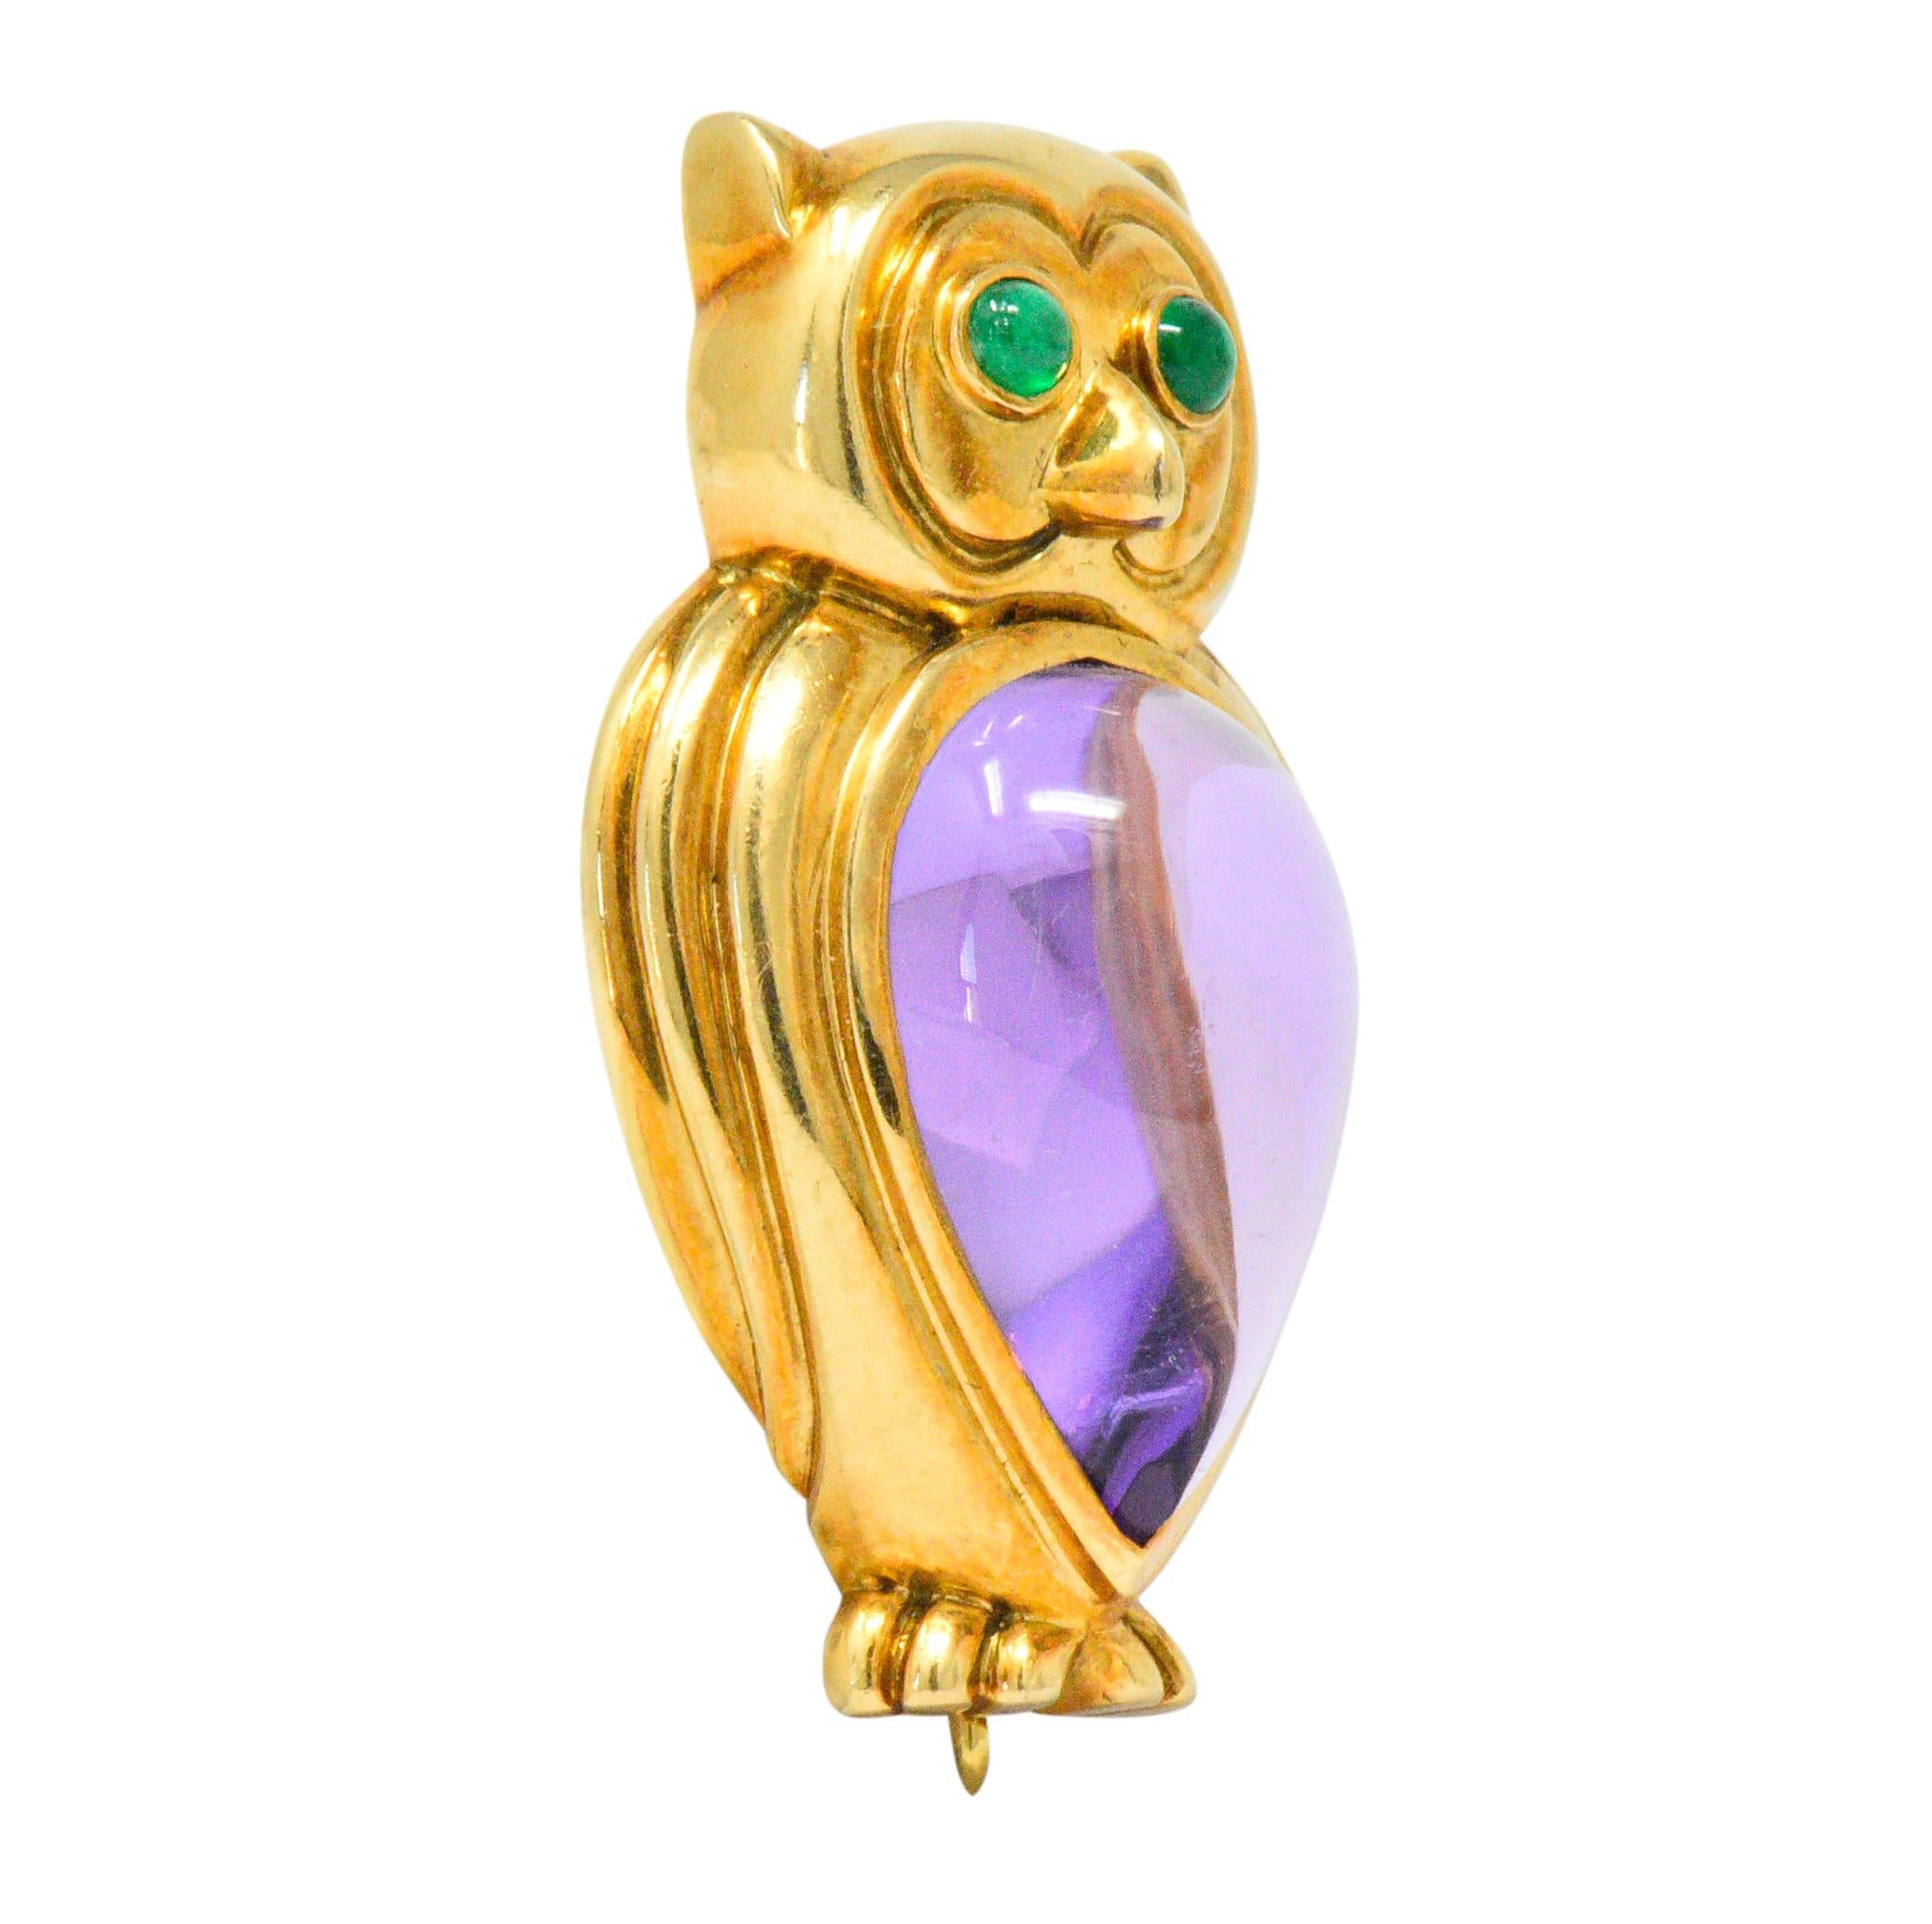 Featuring a dimensional owl design constructed of 18kt yellow gold

Centering a bezel set tear drop shaped cabochon amethyst measuring 18 mm x 11 mm

Round cabochon emerald eyes measuring 2 mm

Fully signed Tiffany & Co 1990 750

Measures 1 1/4